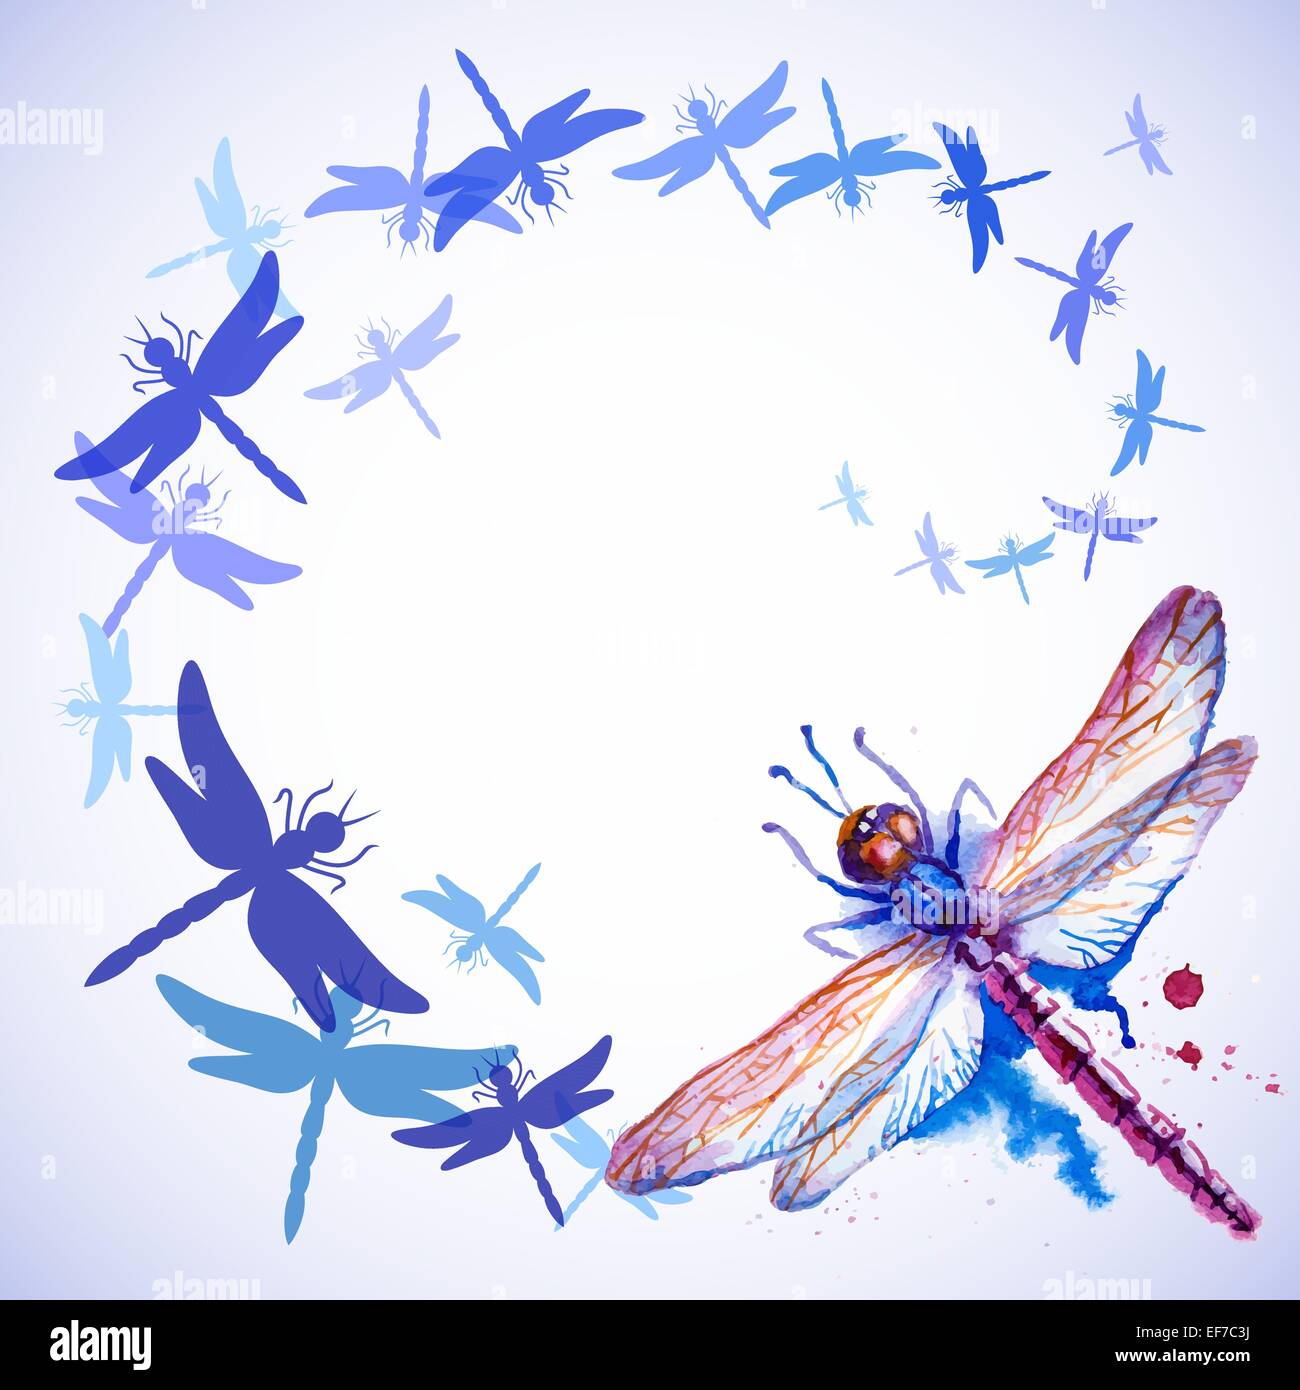 Vector greeting background with beautiful watercolor flying violet and blue dragonflies Stock Vector